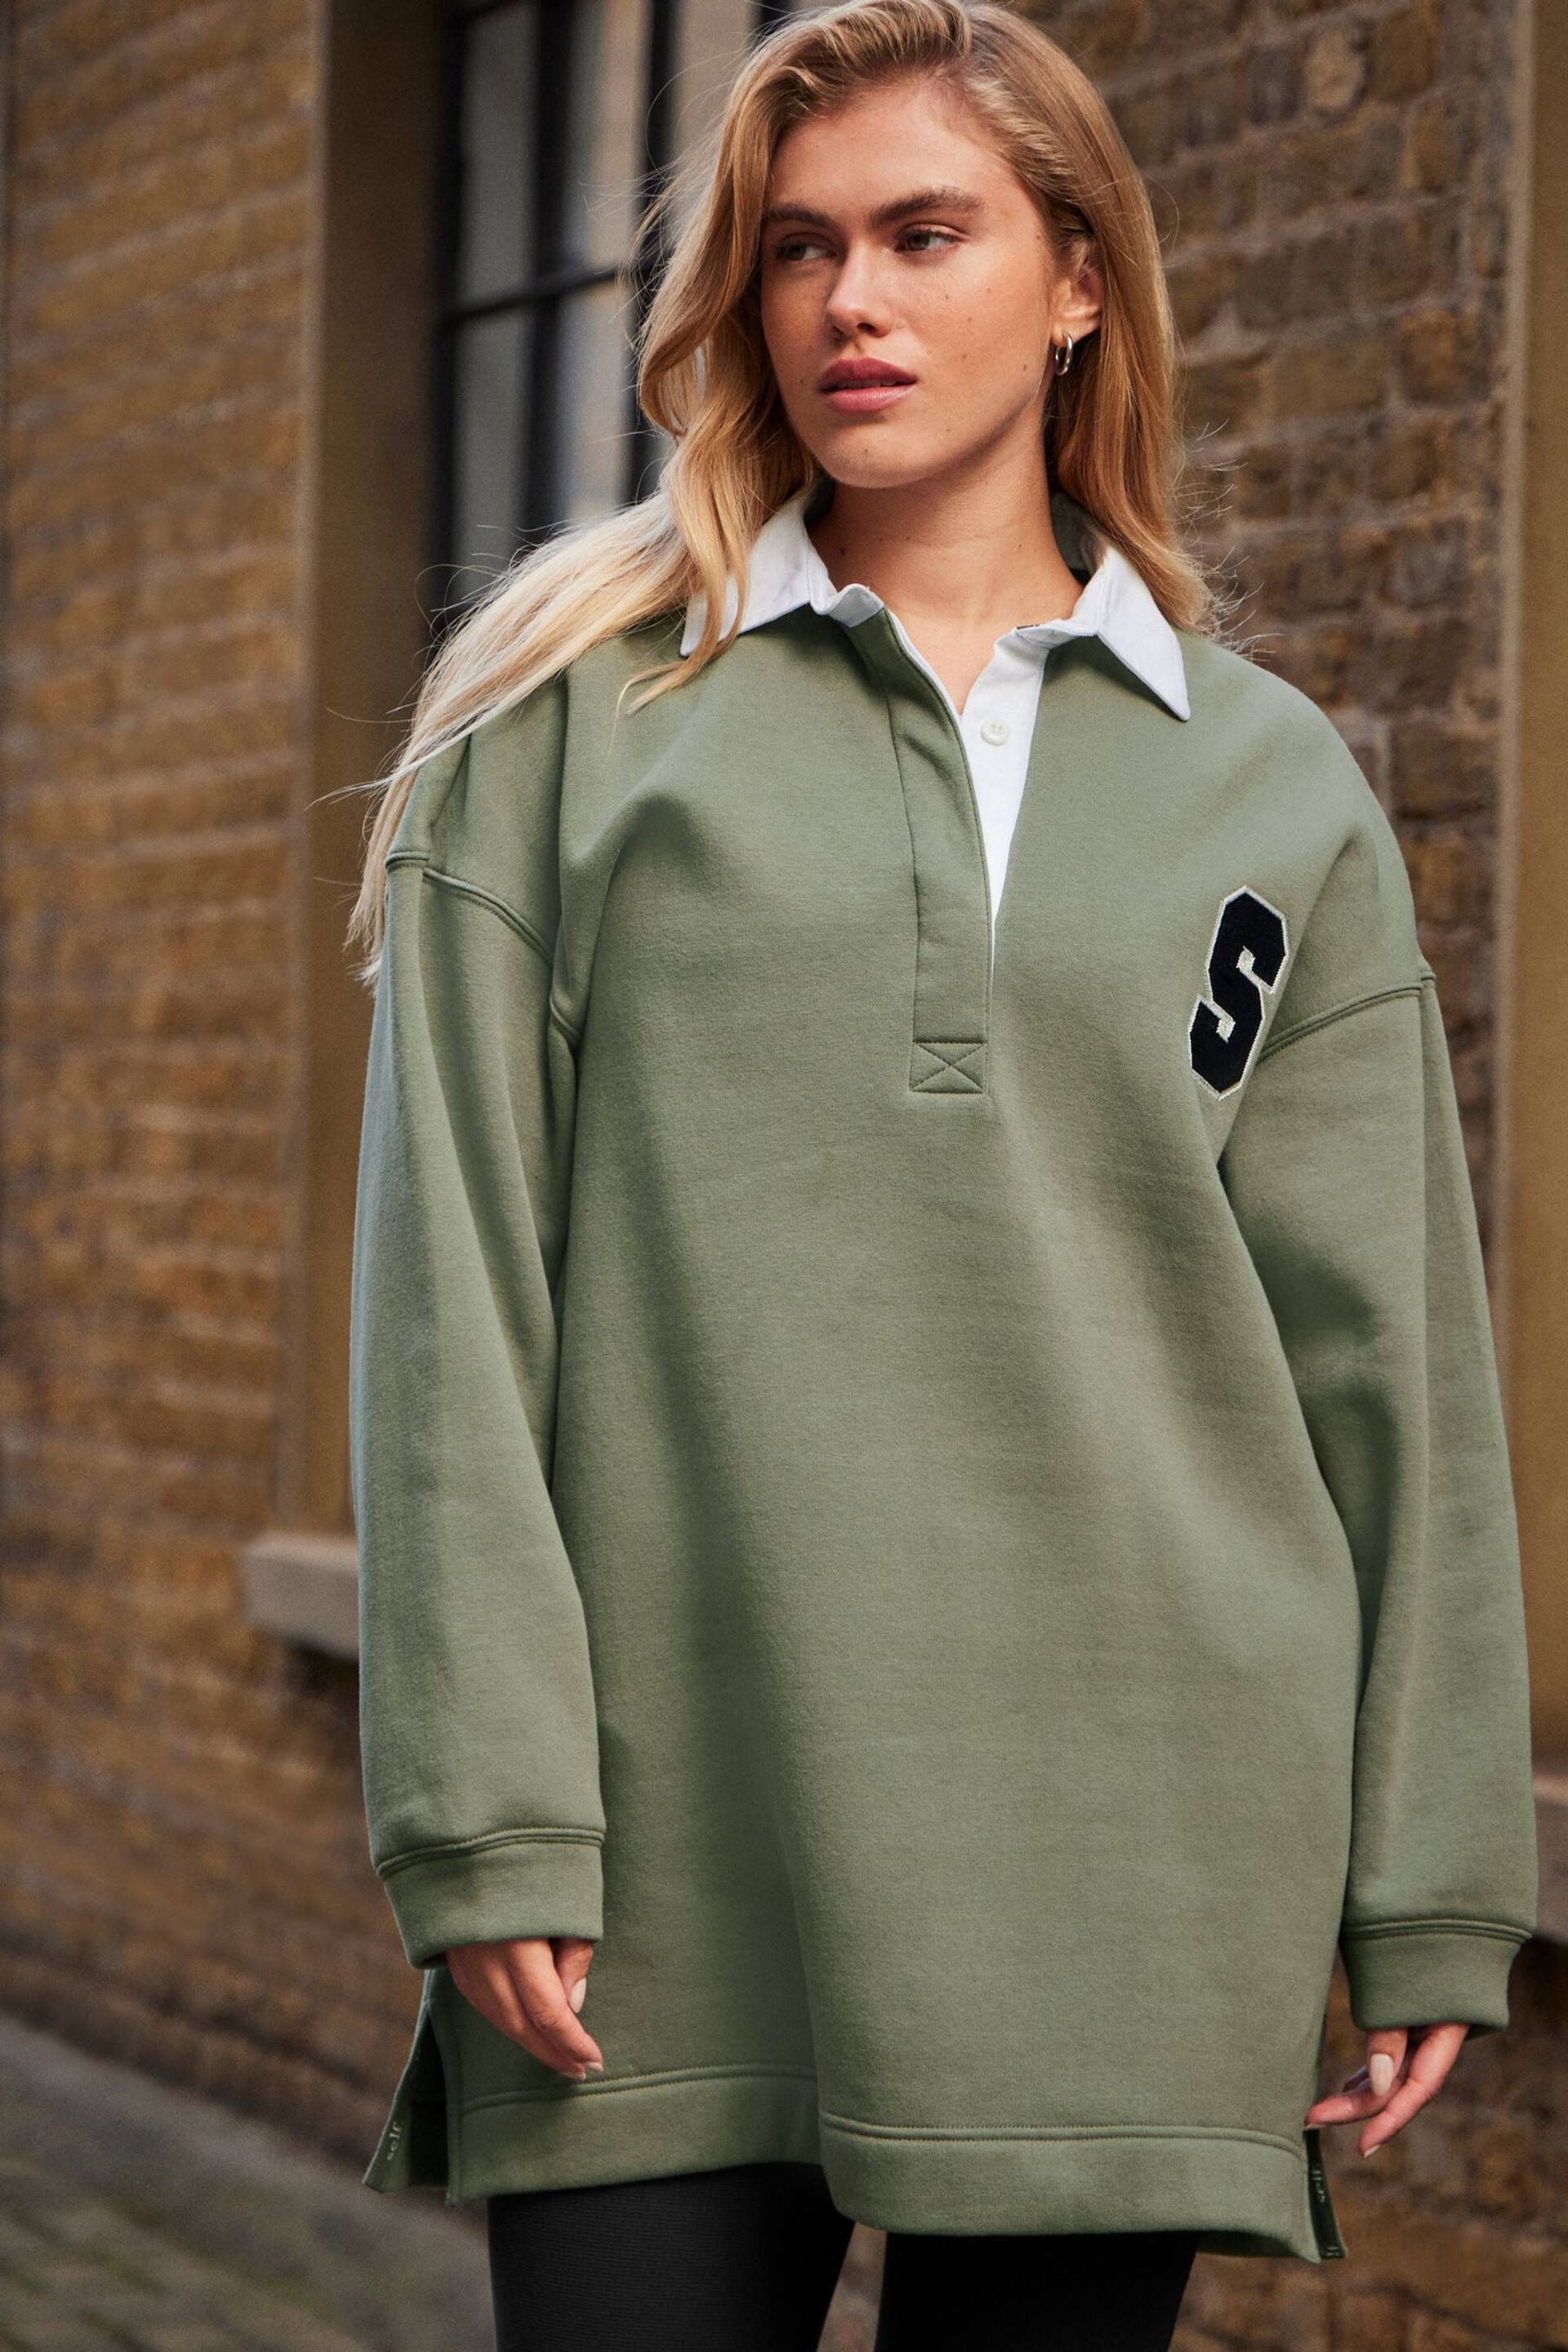 self. Sage Green Rugby Sweat Top - Image 5 of 8